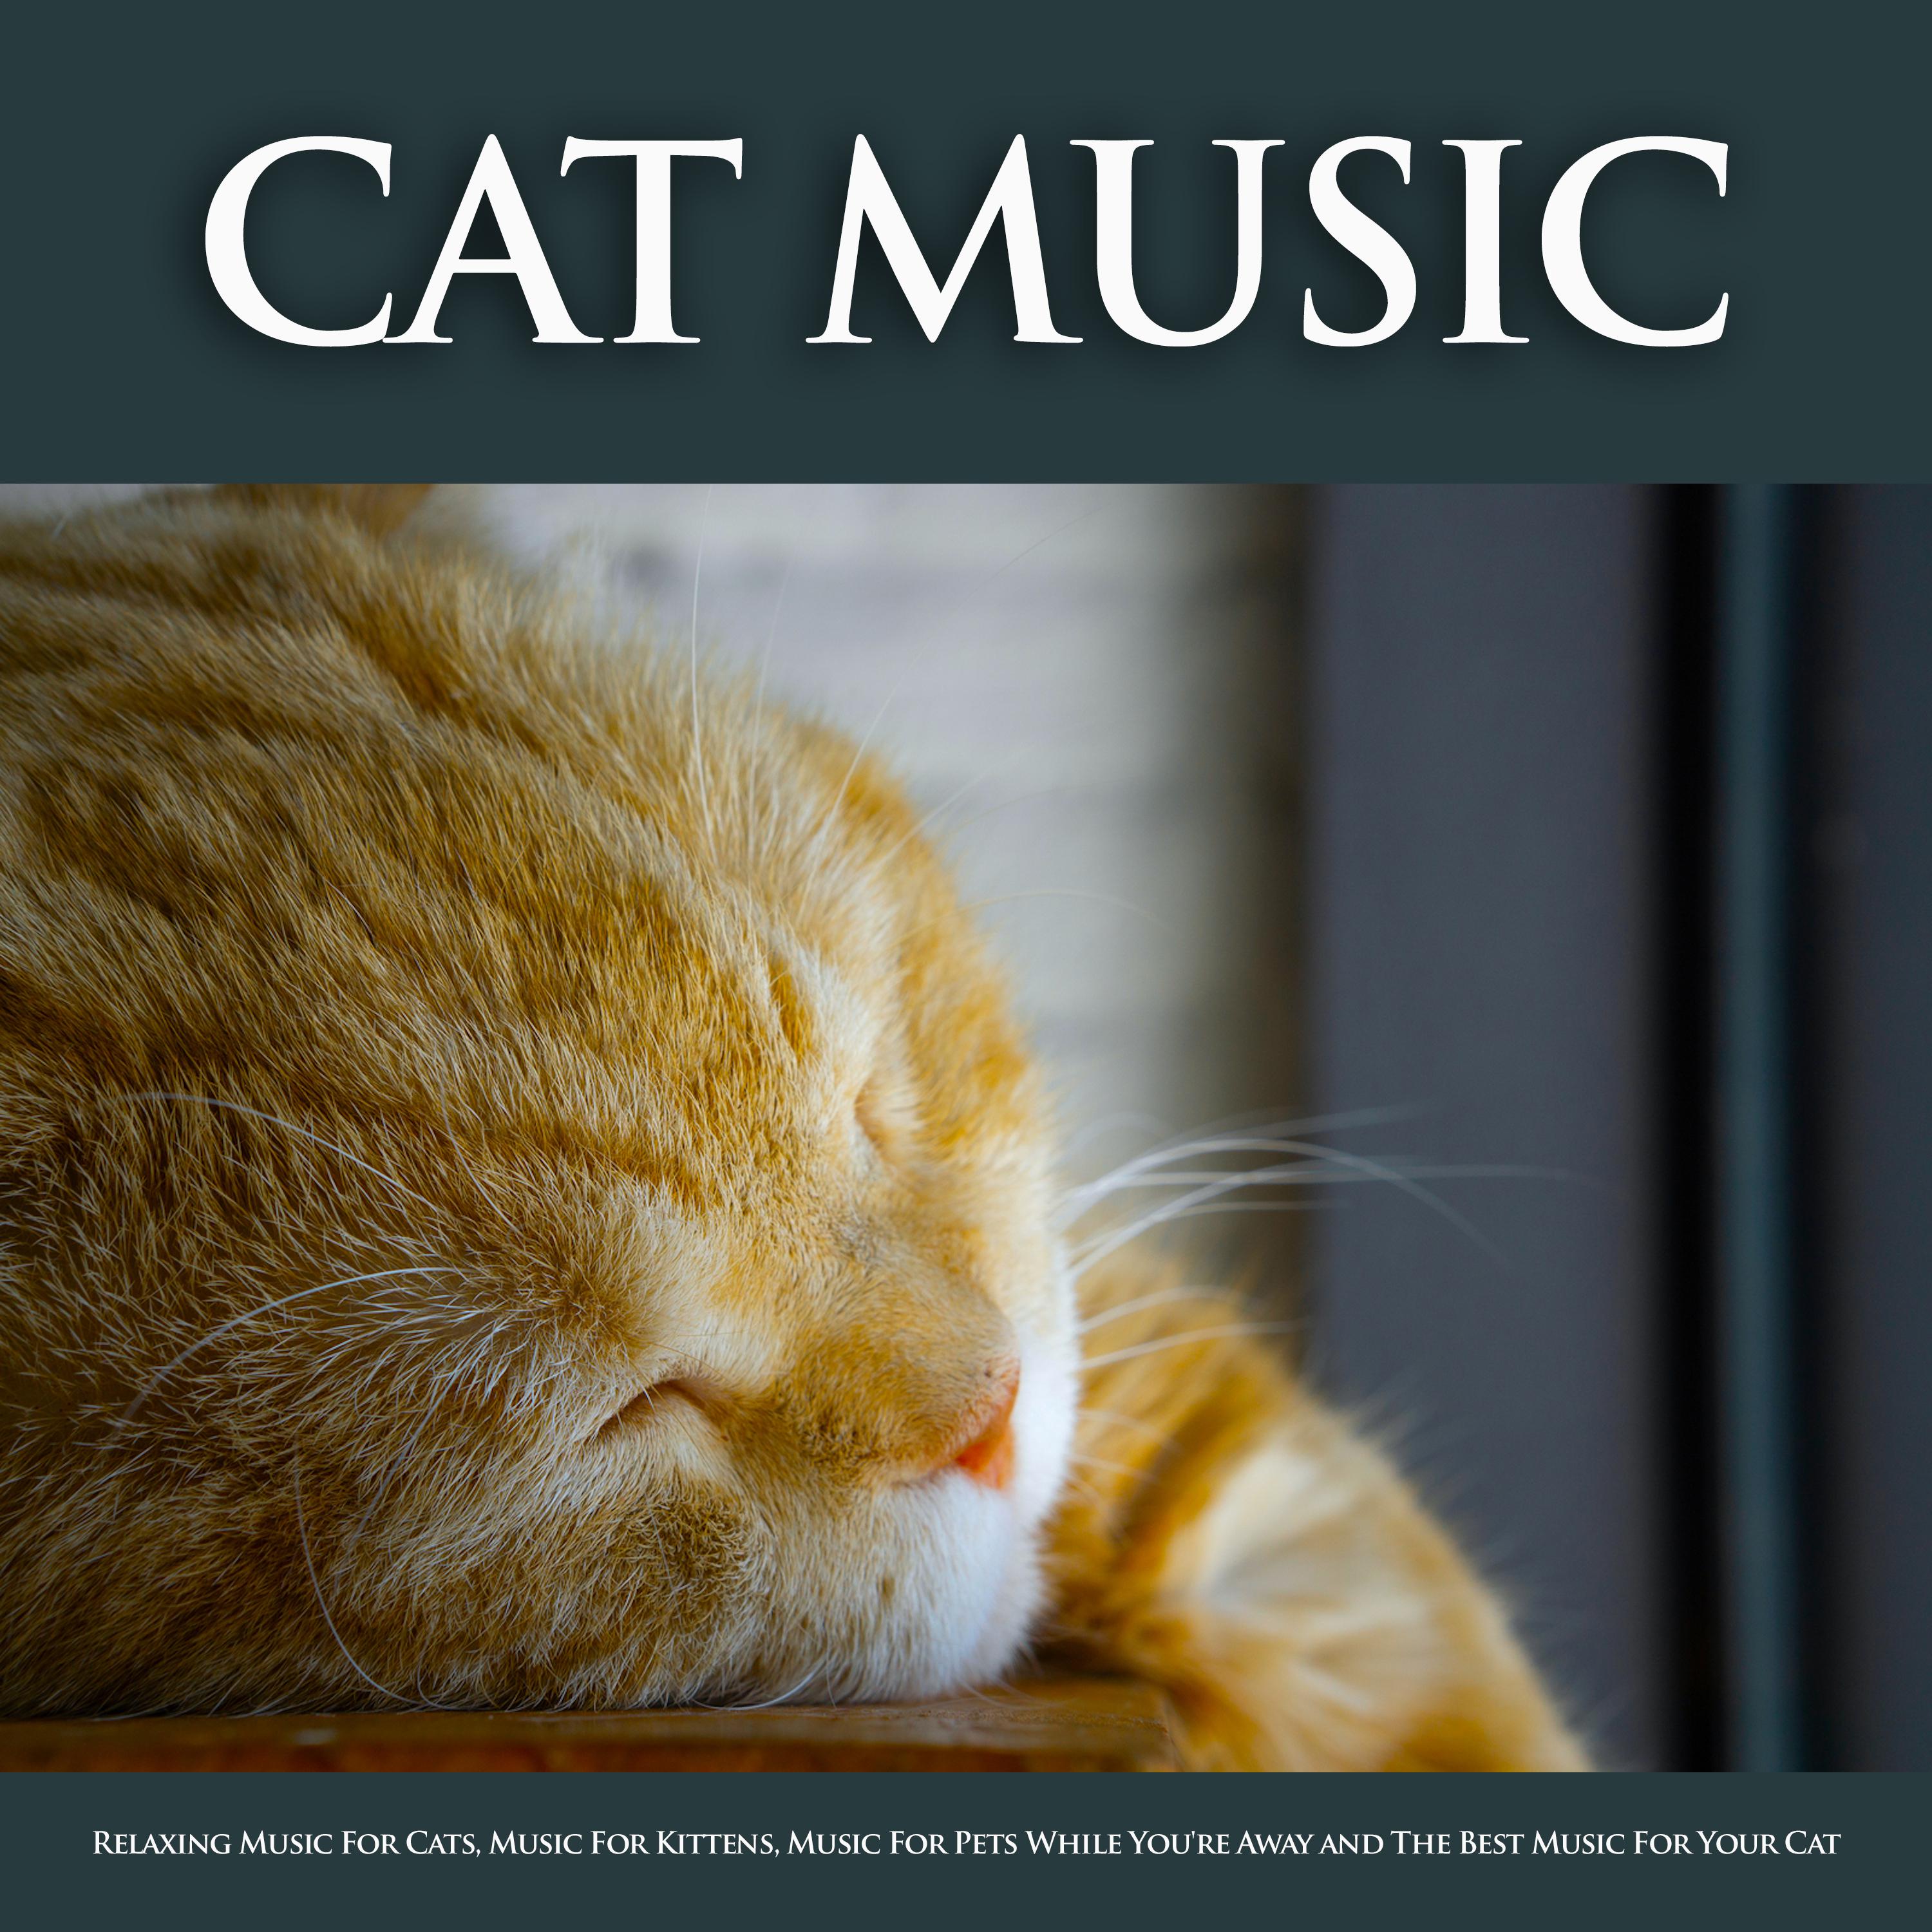 Cat Music: Relaxing Music For Cats, Music For Kittens, Music For Pets While You're Away and The Best Music For Your Cat